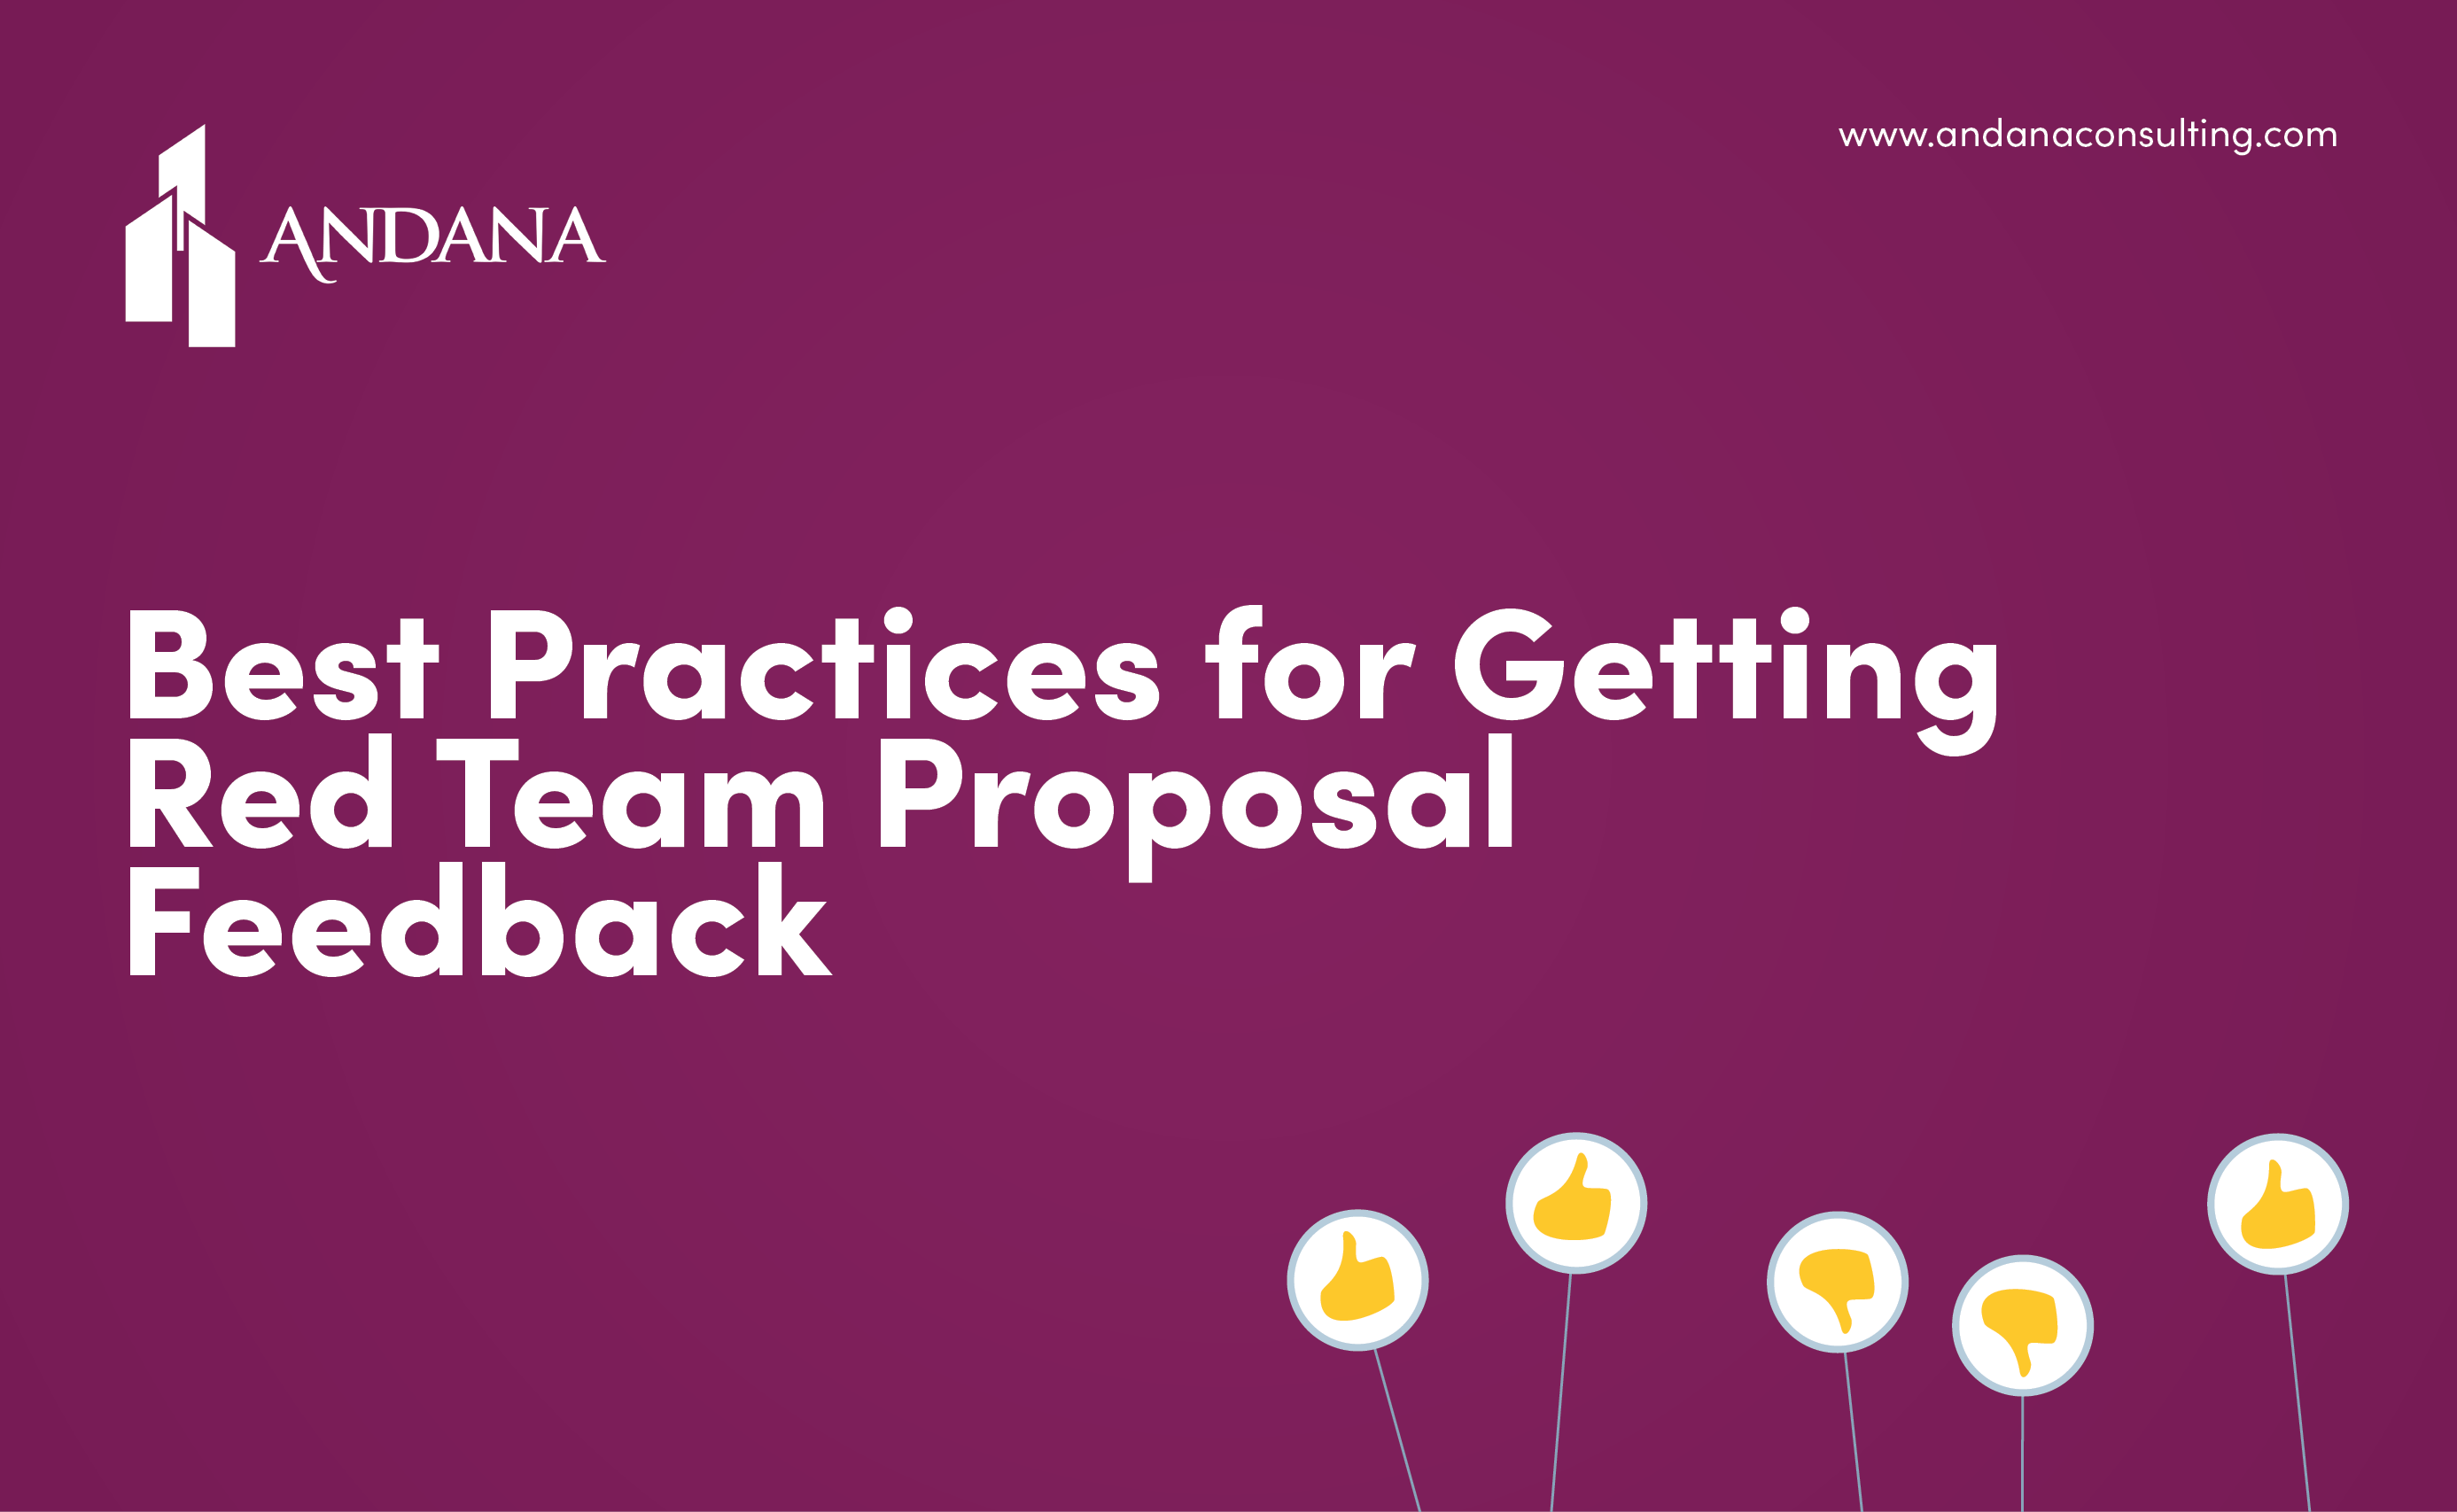 Best Practices for Getting Proposal Feedback During a Red Team Review